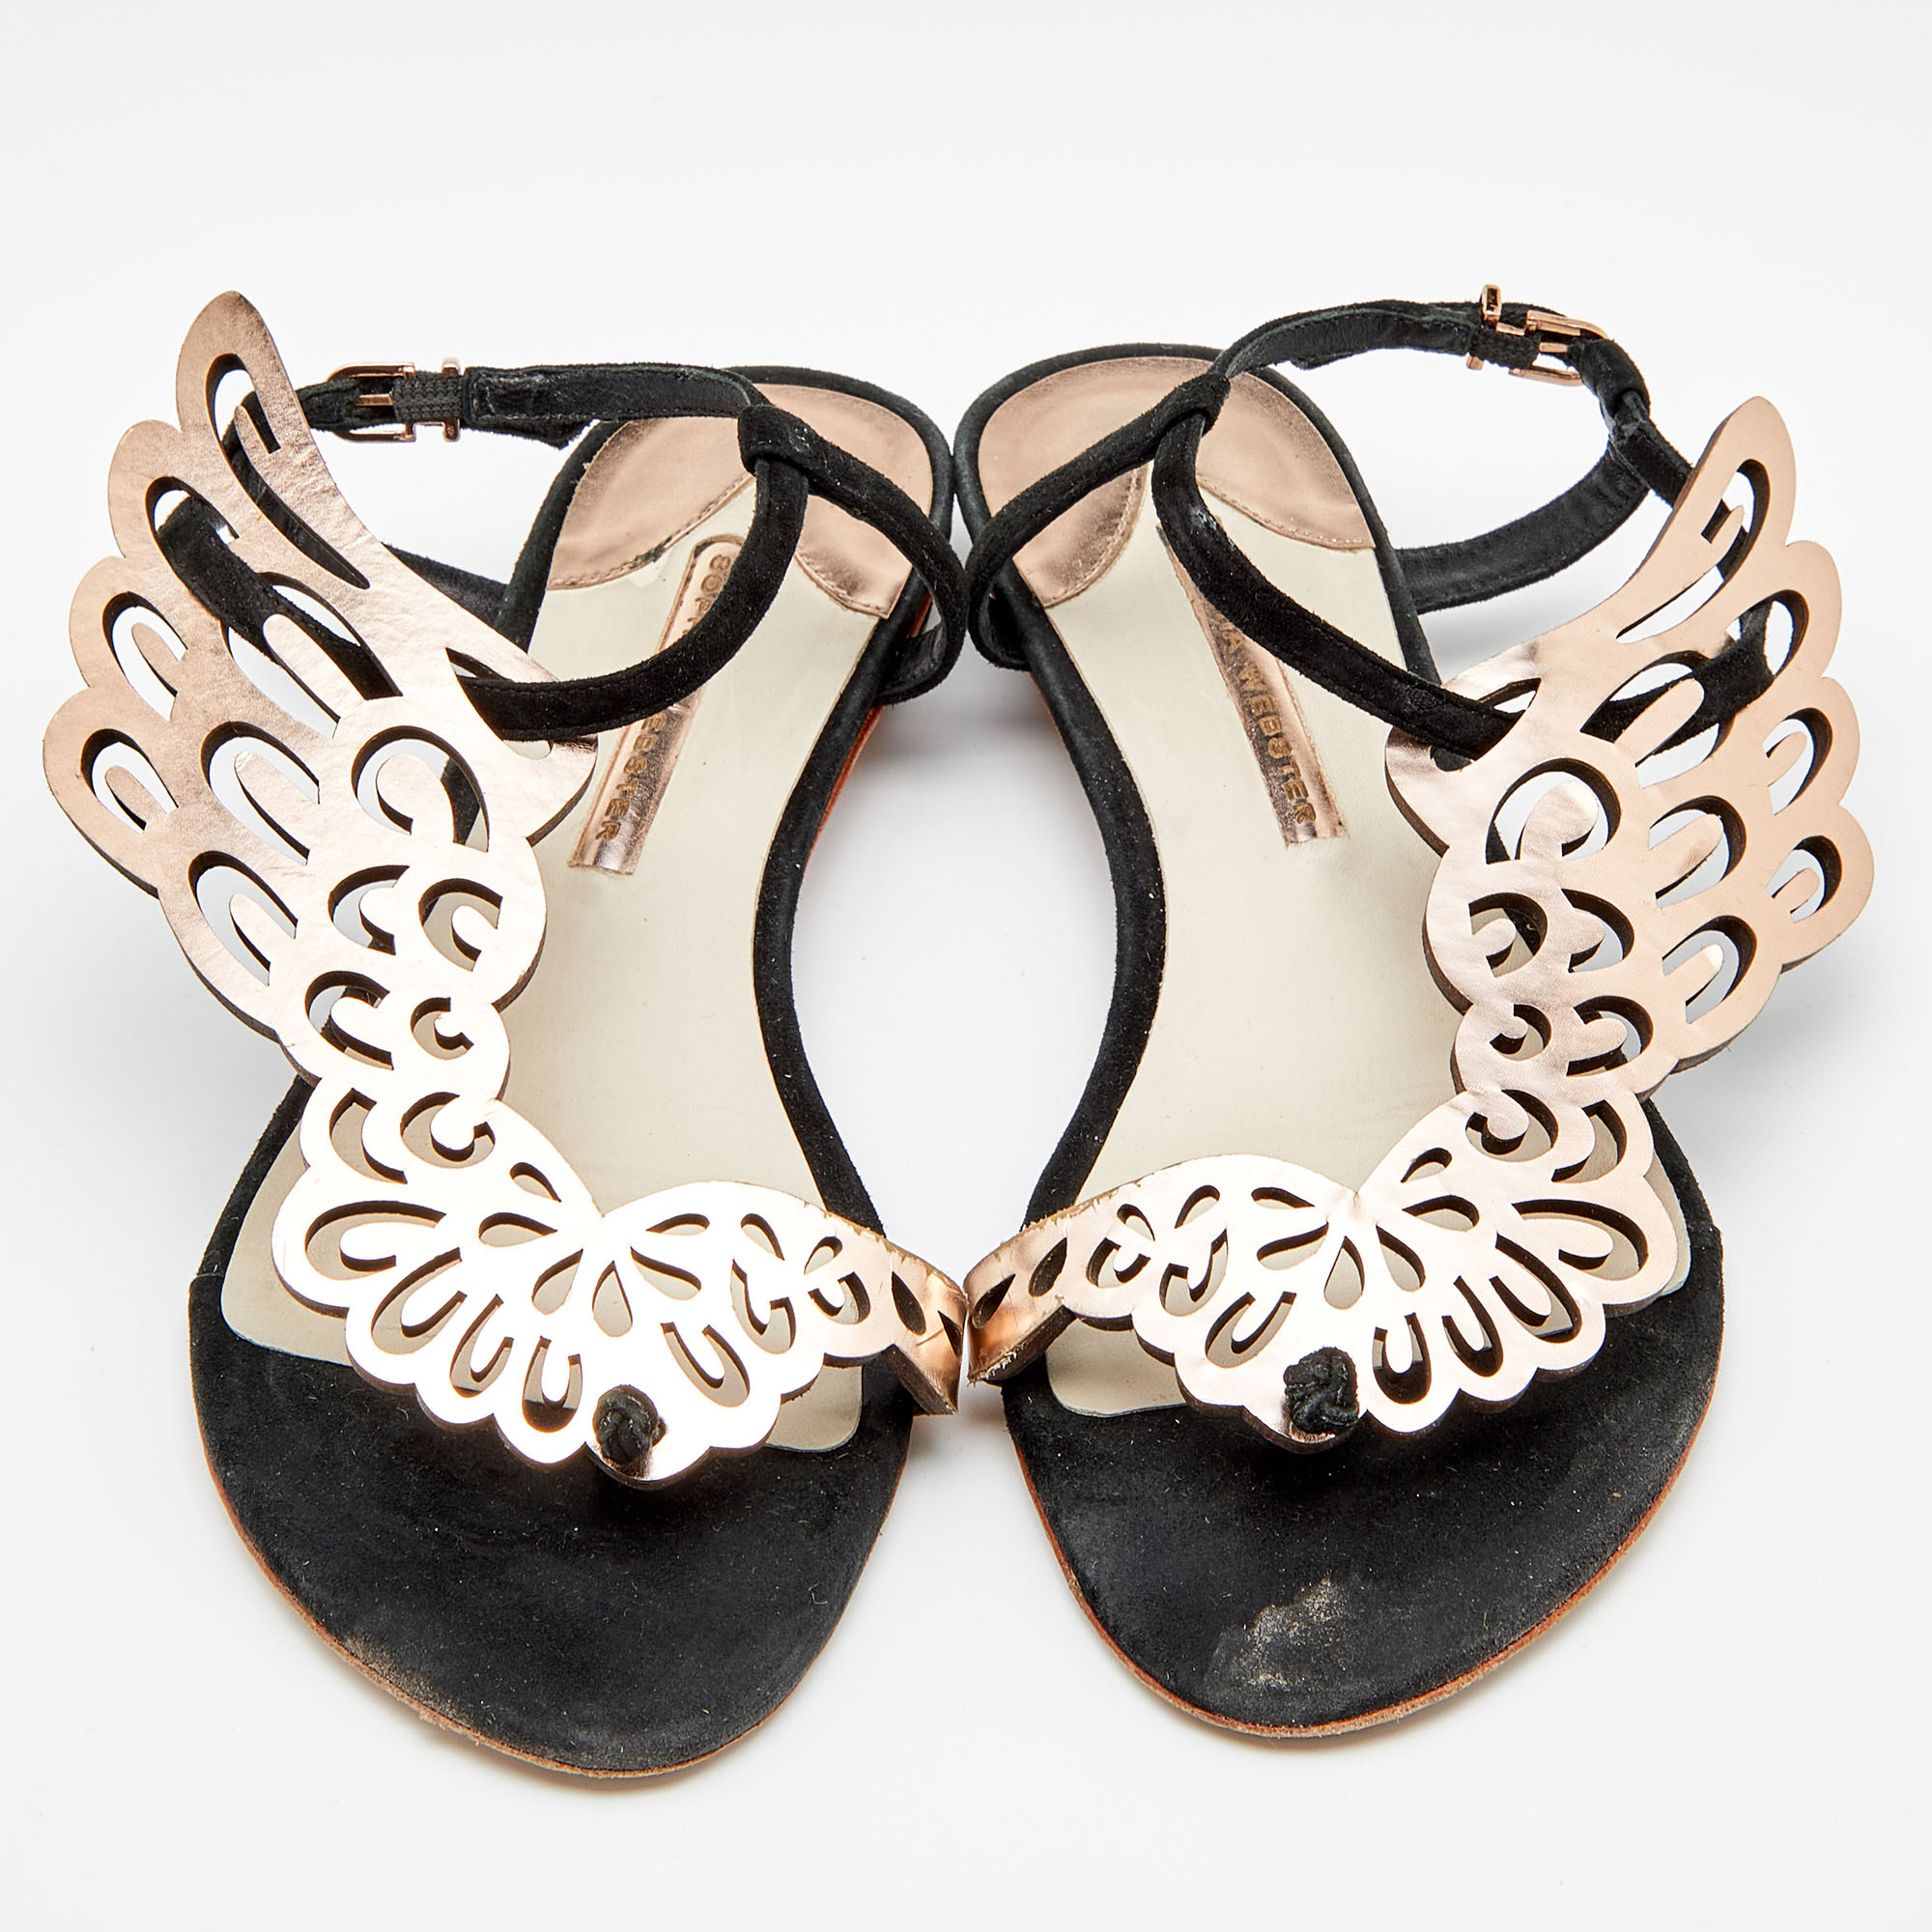 Sophia Webster Metallic Rose Gold/Black Leather And Suede Seraphina Angel Wing Flat Sandals Size 39.5